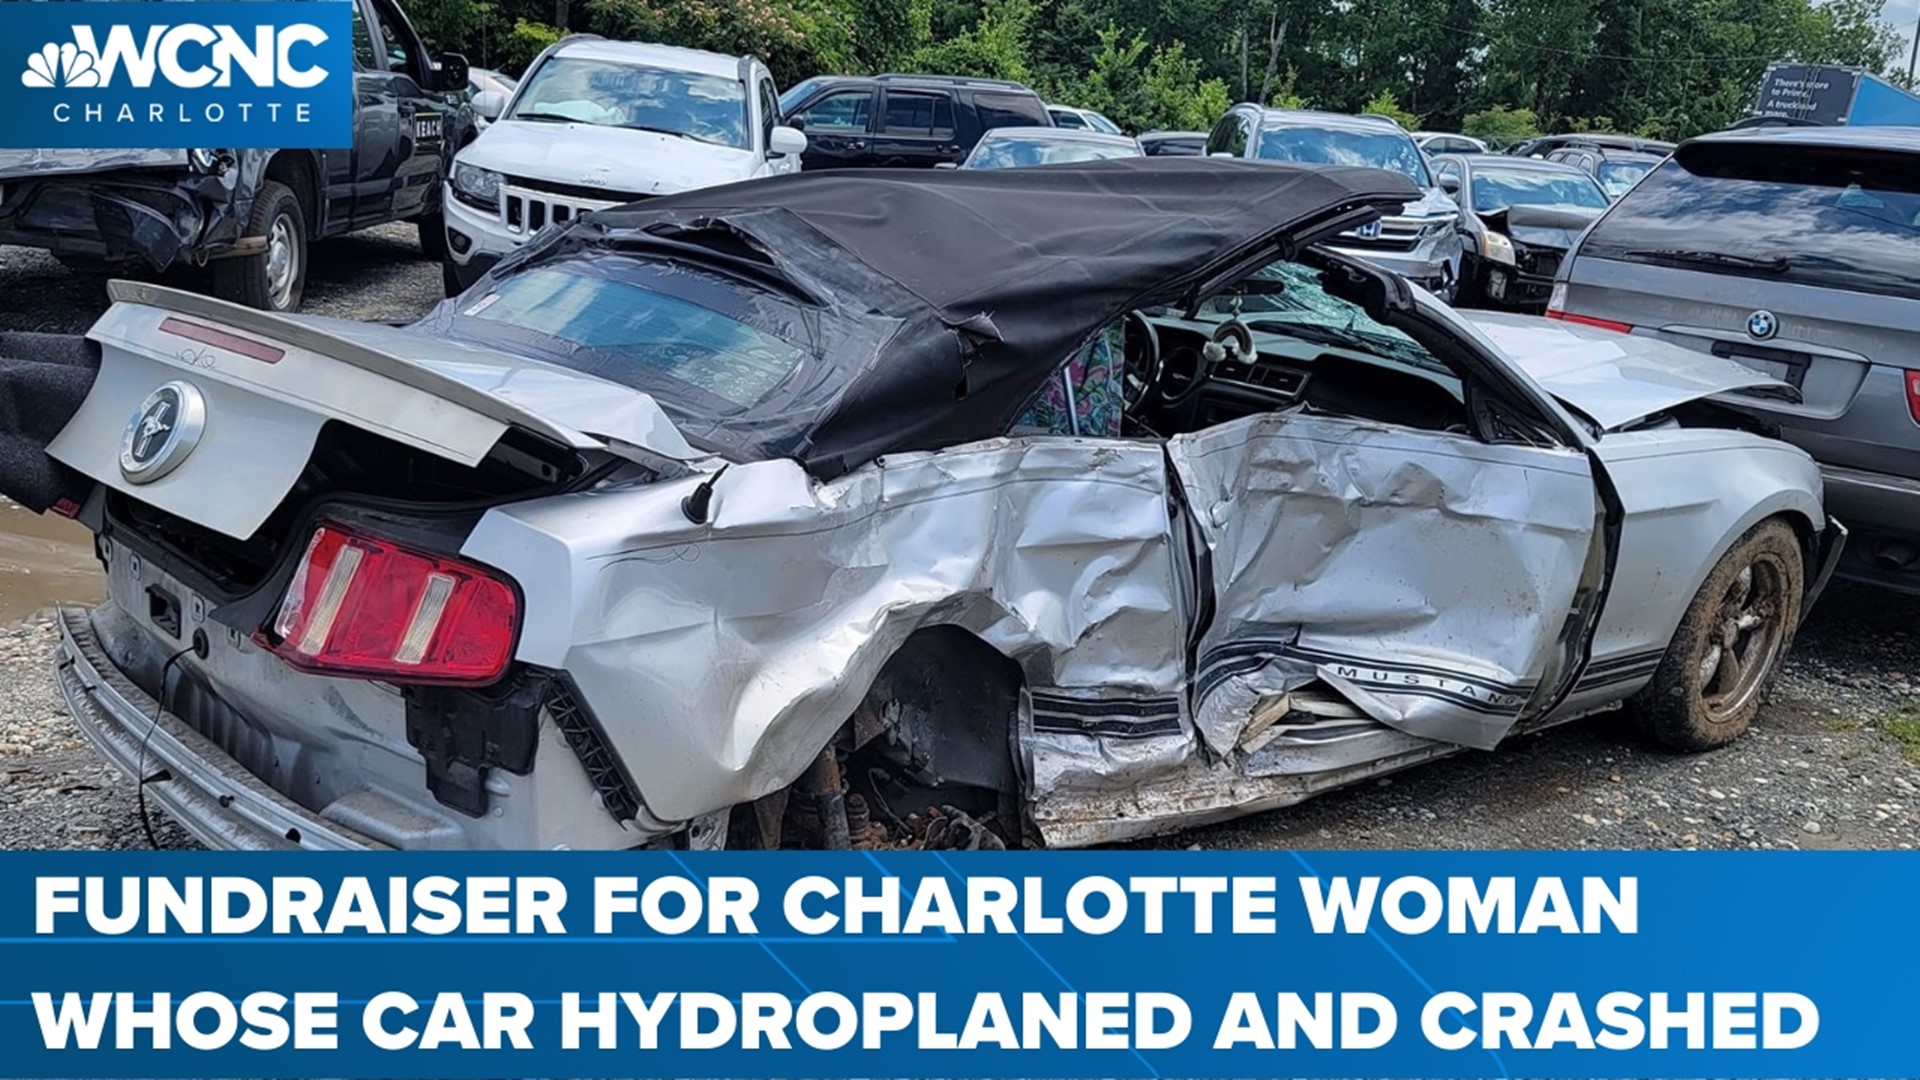 WCNC Charlotte's Briana Harper spoke to that driver just days after being released from the hospital.